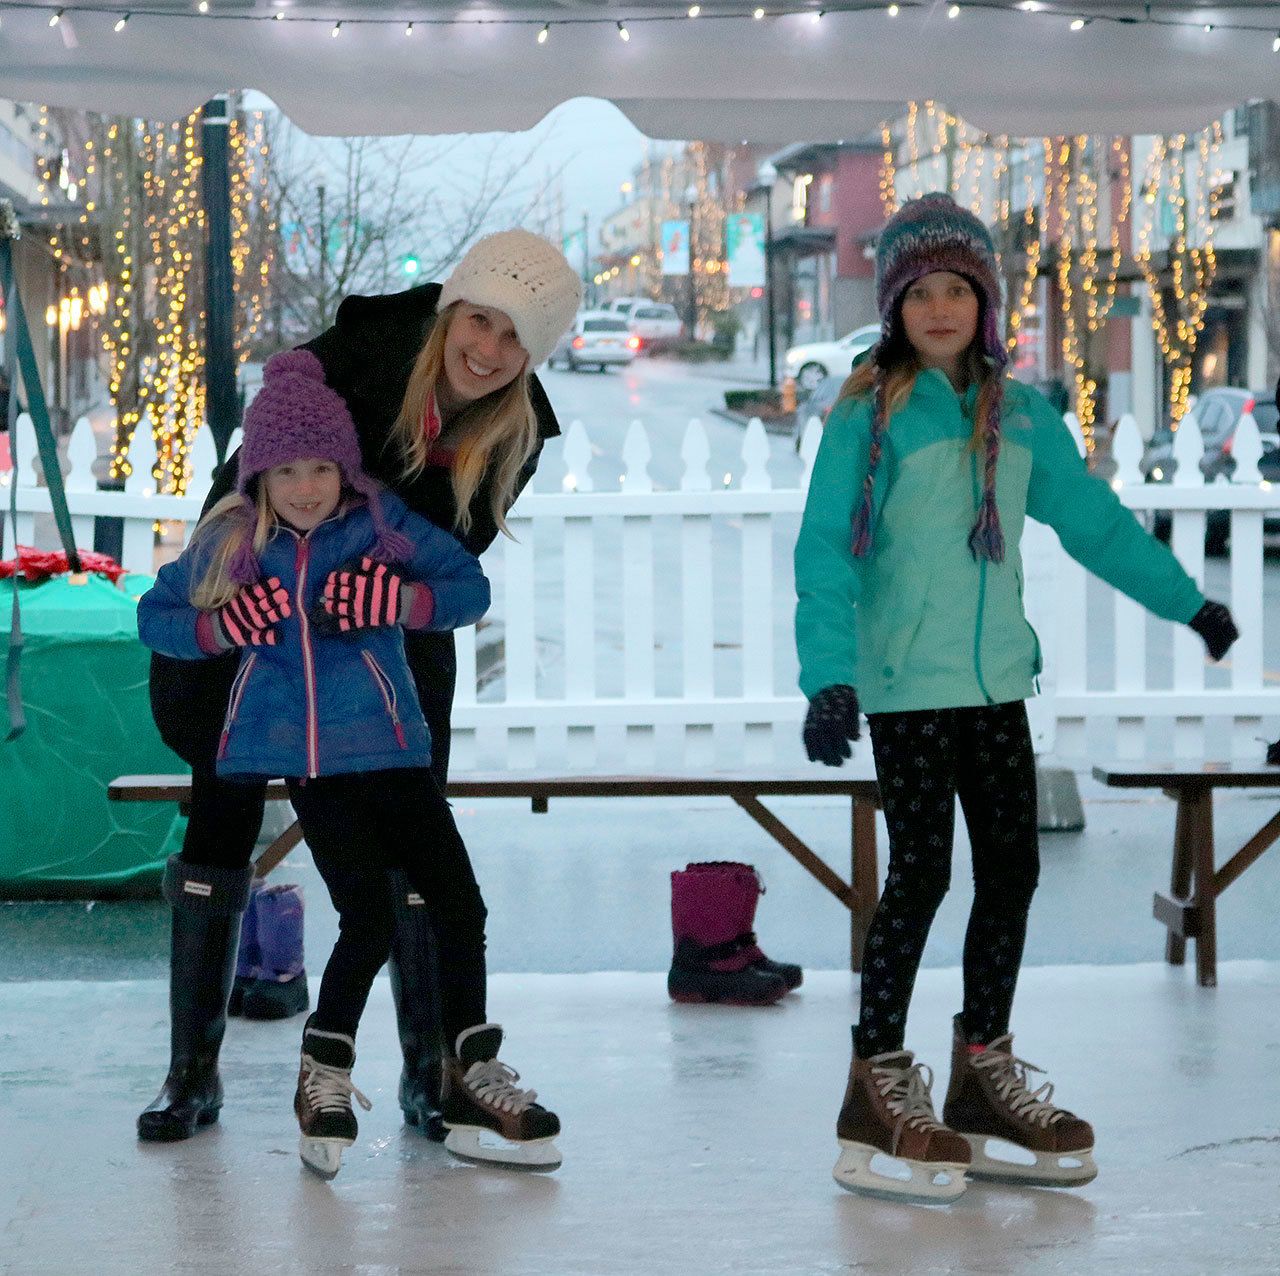 Evan Pappas/File Photo                                Skaters enjoy the synthetic ice rink on Snoqualmie Ridge during the 2016 holidays, one of several city events organized by the city of Snoqualmie’s events coordinator.